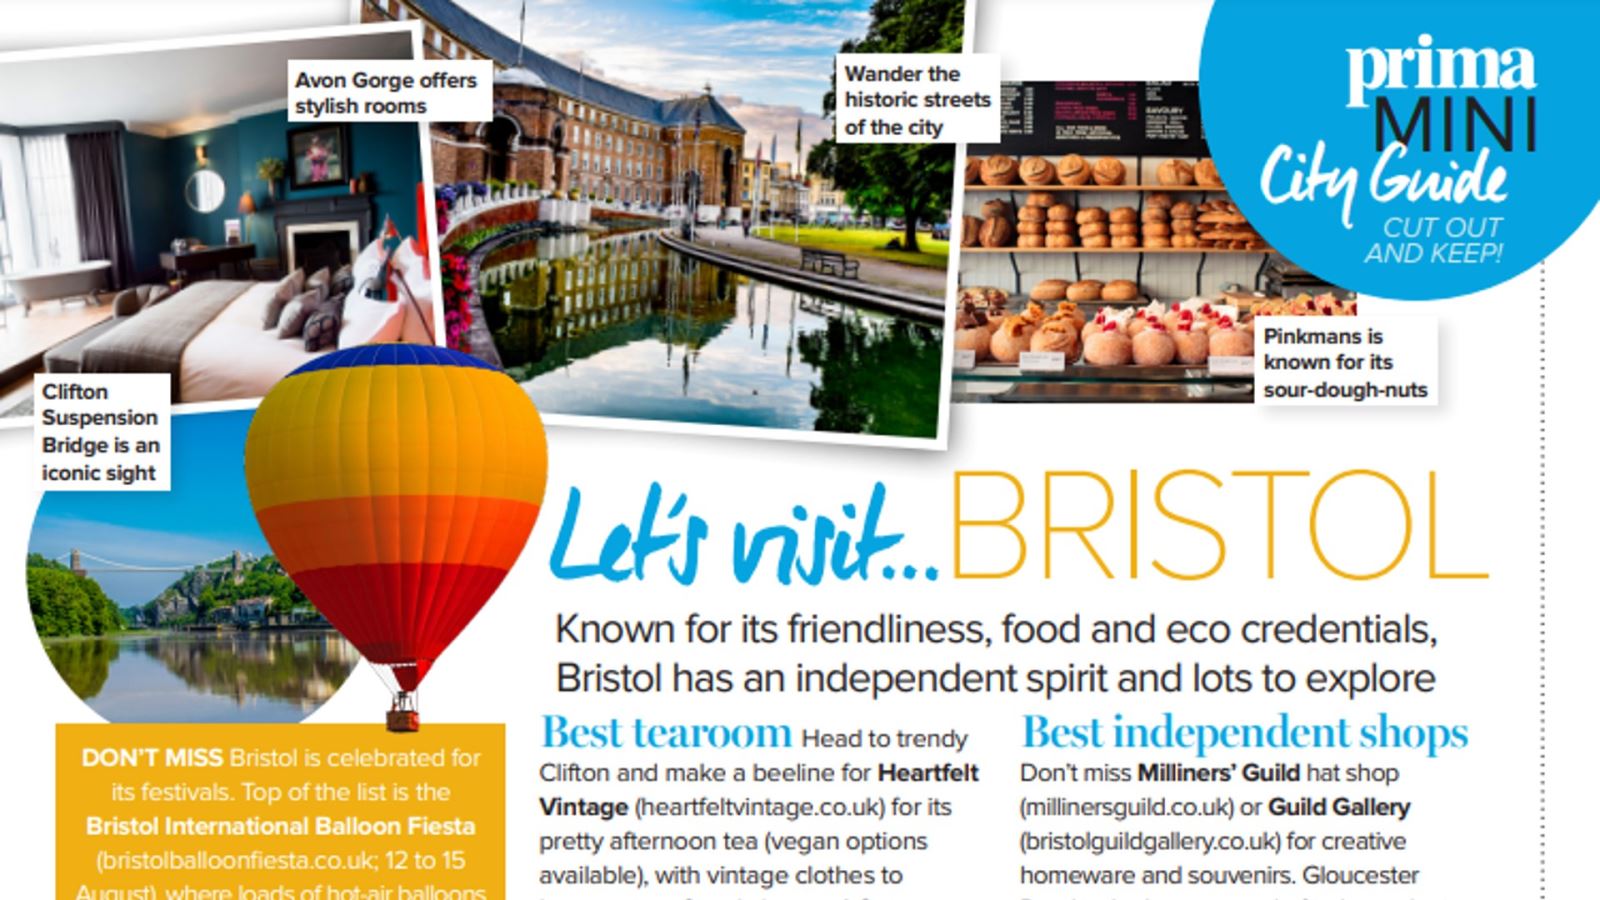 Snippet of coverage from Prima Magazine in August 2021